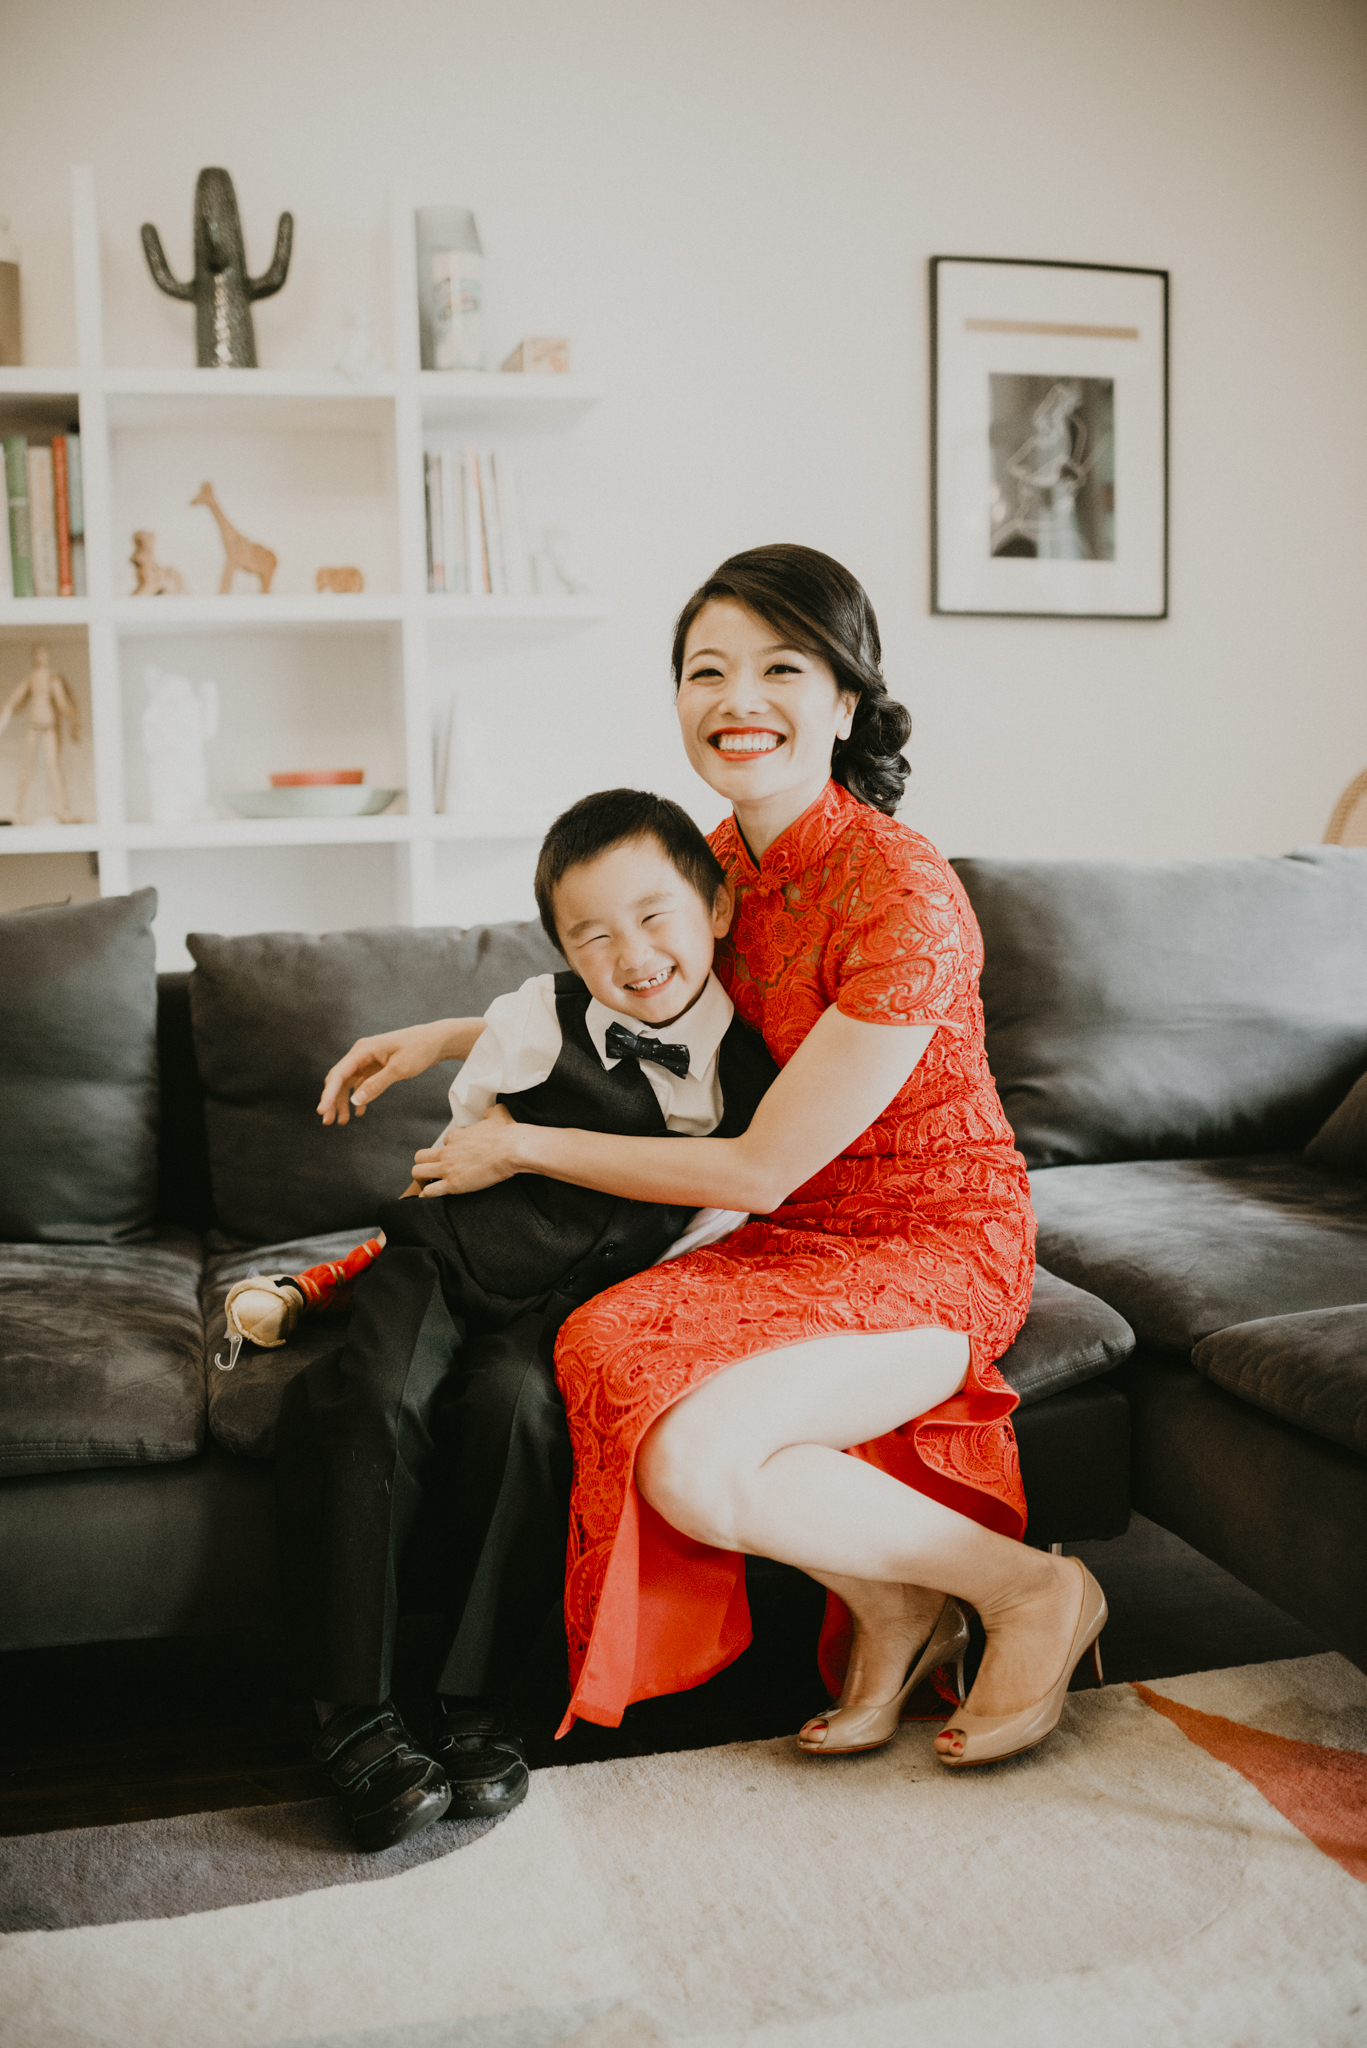 agnes-duy-15th-december-2018-chinese-vietnamese-wedding-tea-ceremony-yarraville-home-house-documentary-candid-photographer-sarah-matler-photography-6